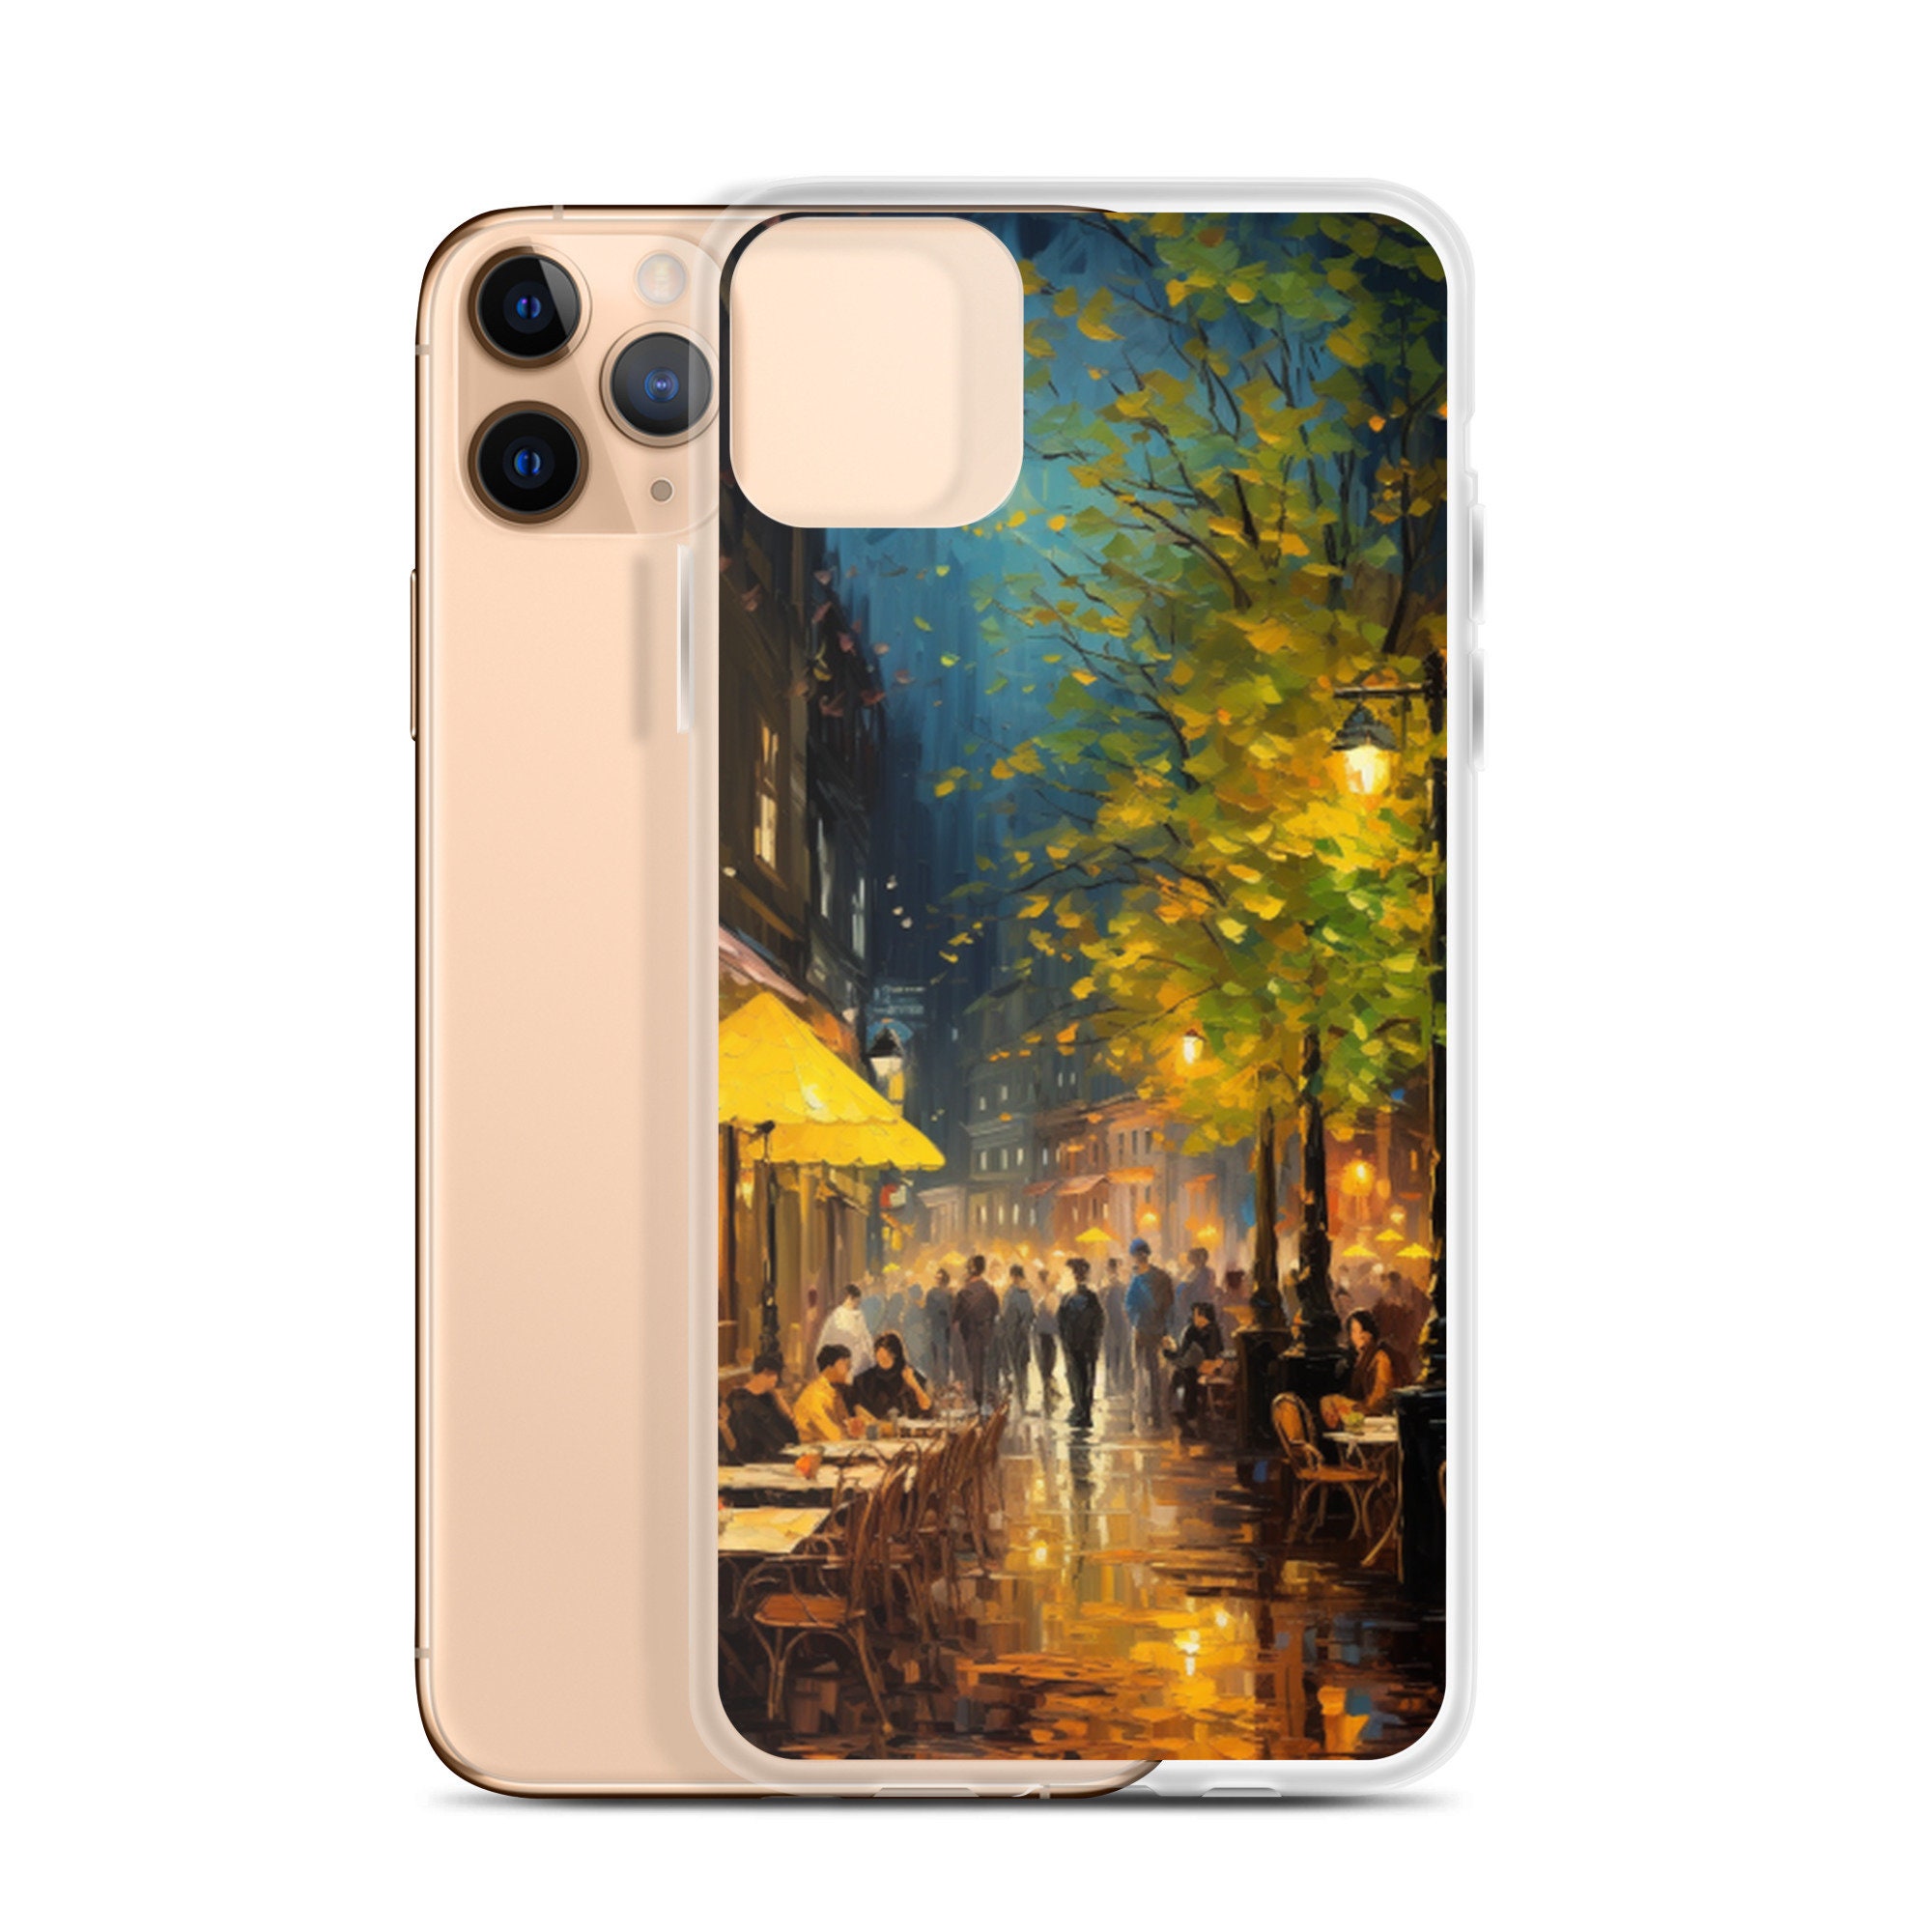 Pixel pixie iPhone Case by Art by Louie